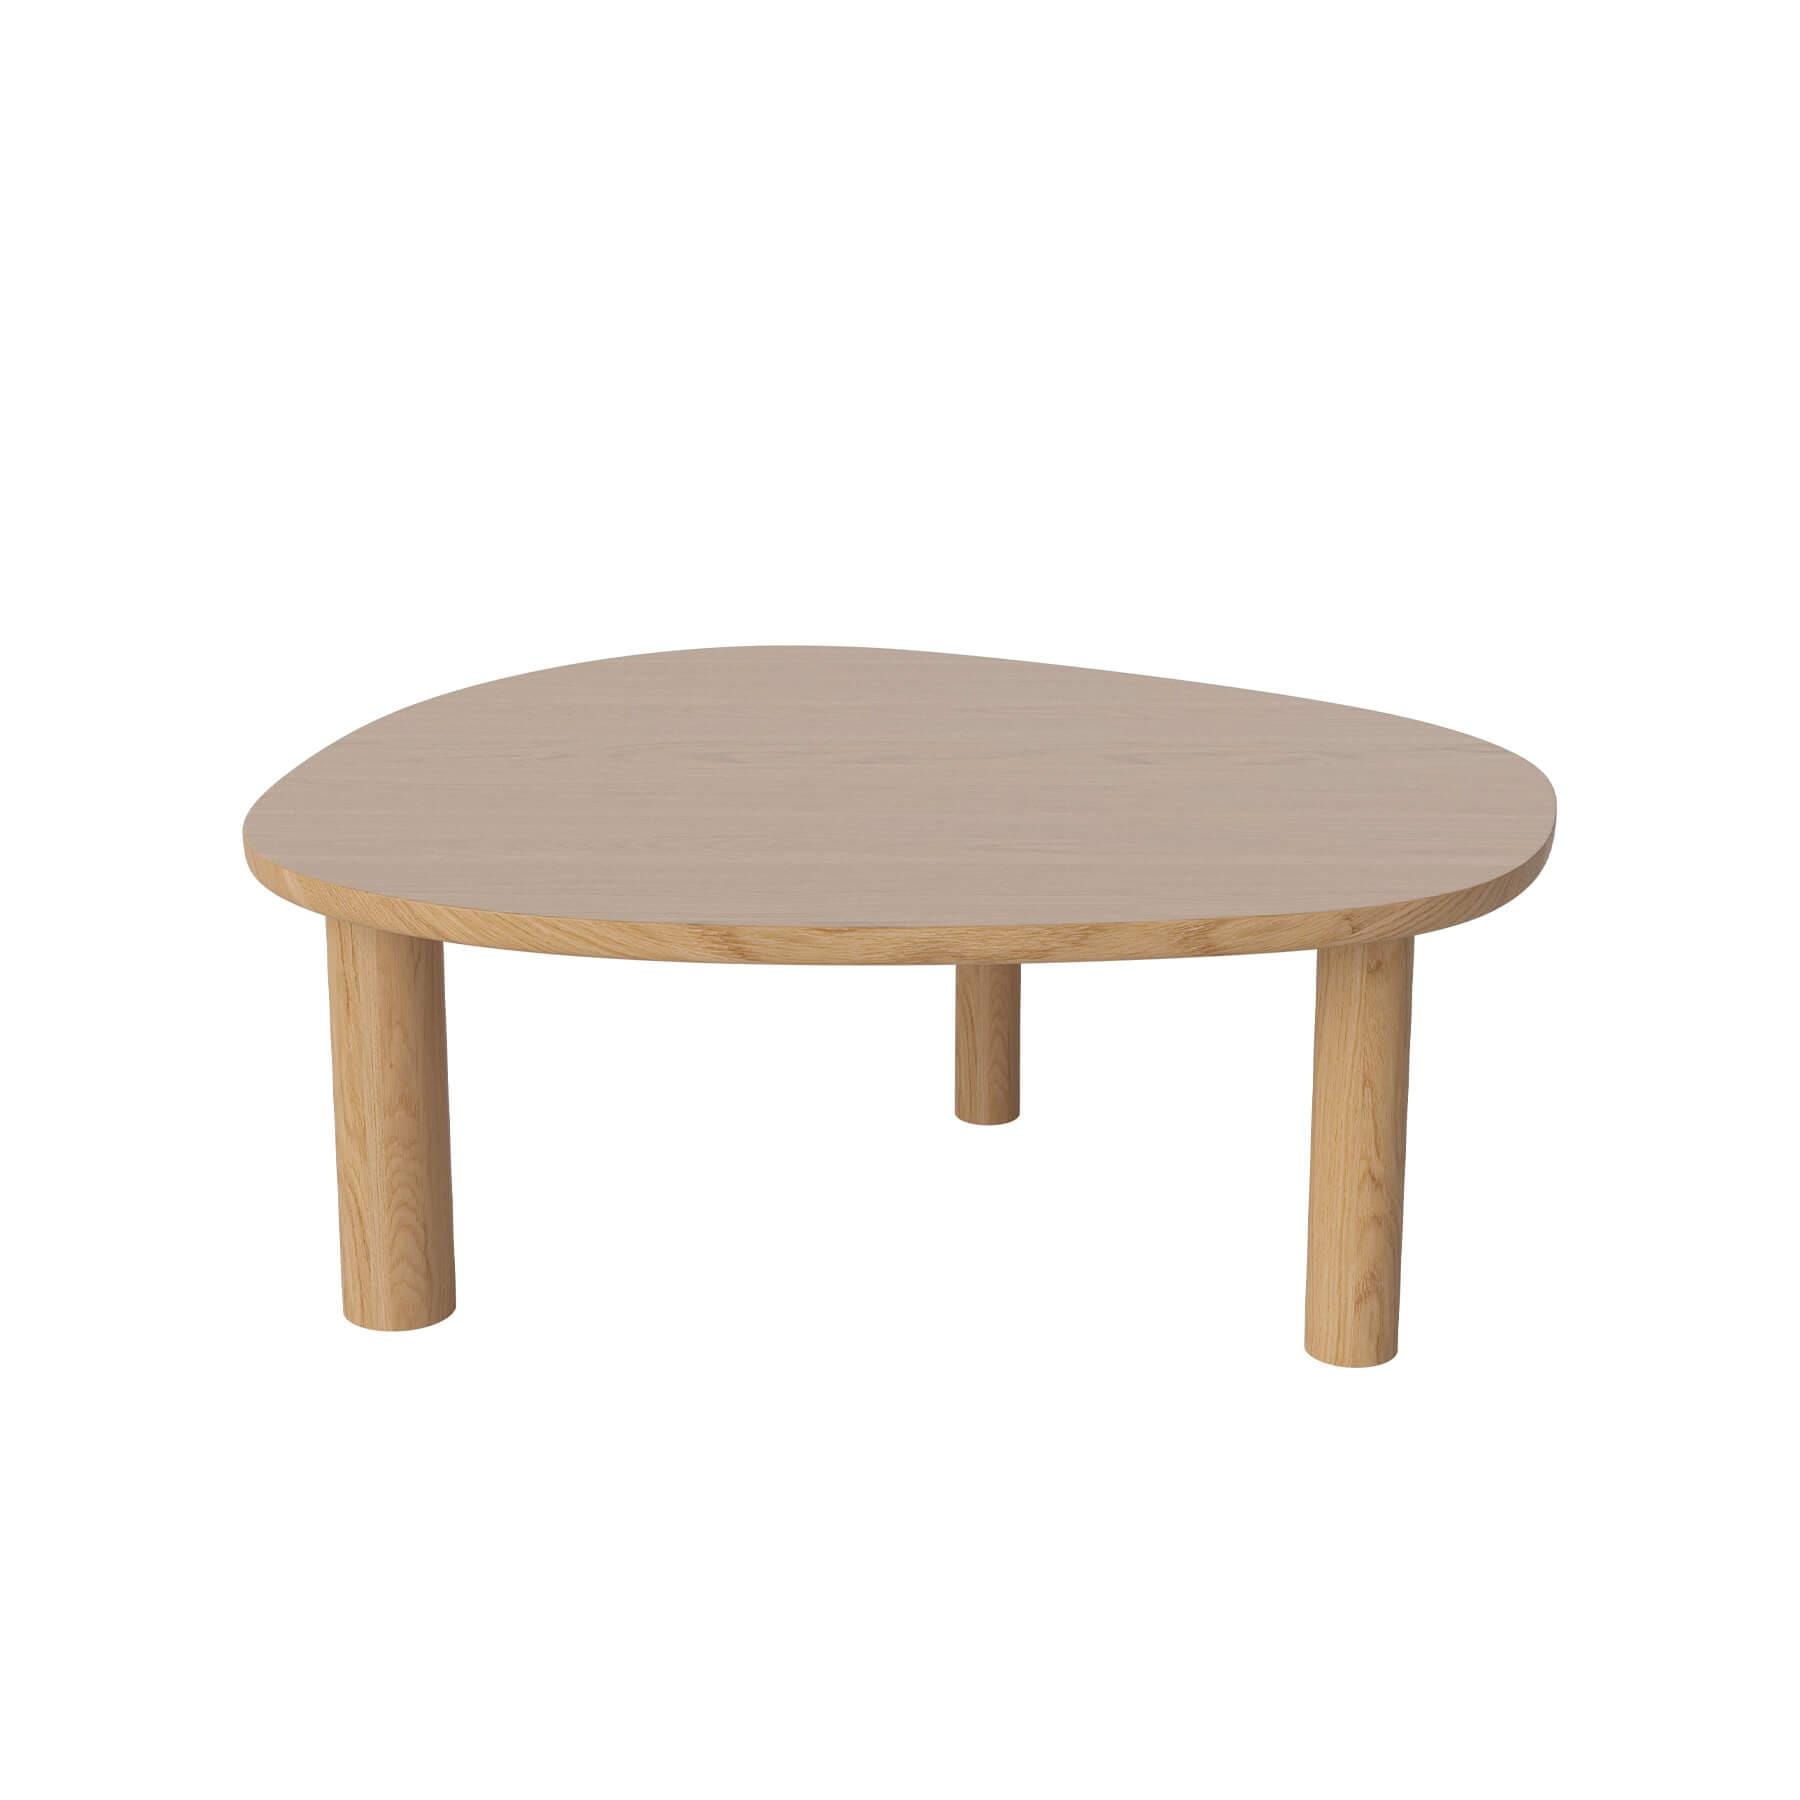 Bolia Latch Coffee Table Single Oiled Oak Light Wood Designer Furniture From Holloways Of Ludlow